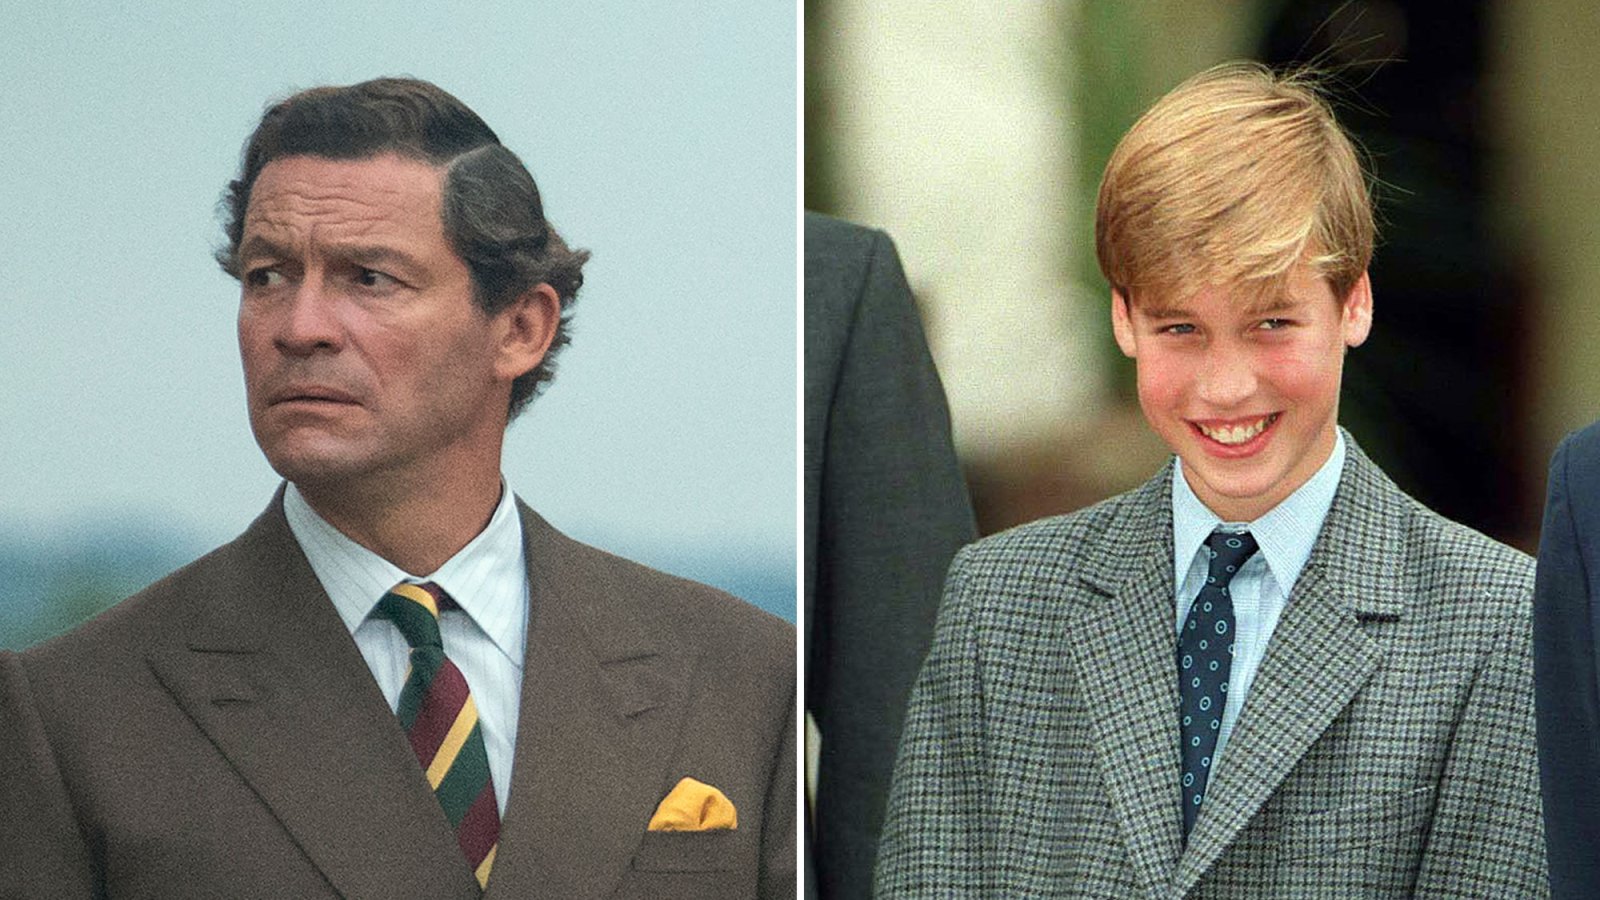 Dominic West’s Son Senan West Has Been Cast in Season 5 of The Crown as Prince William